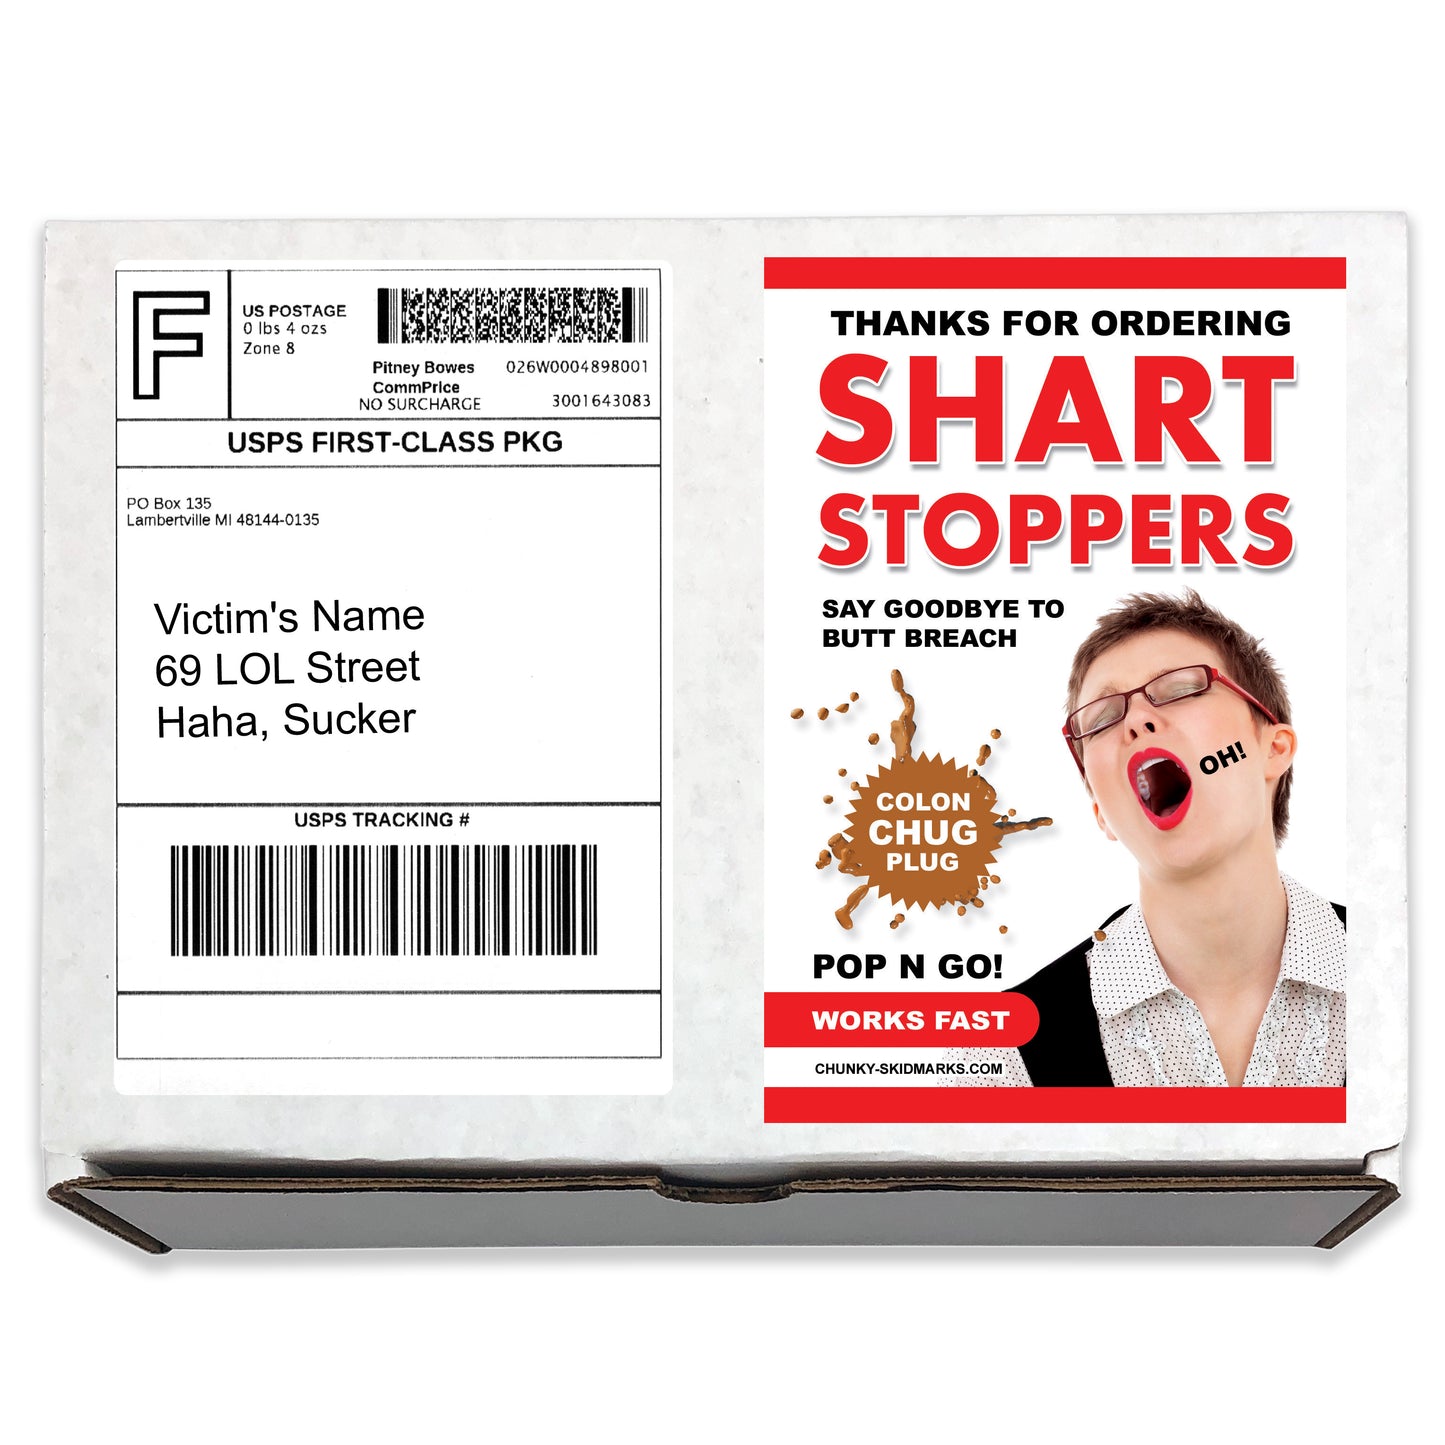 Shart Stoppers Prank Mail